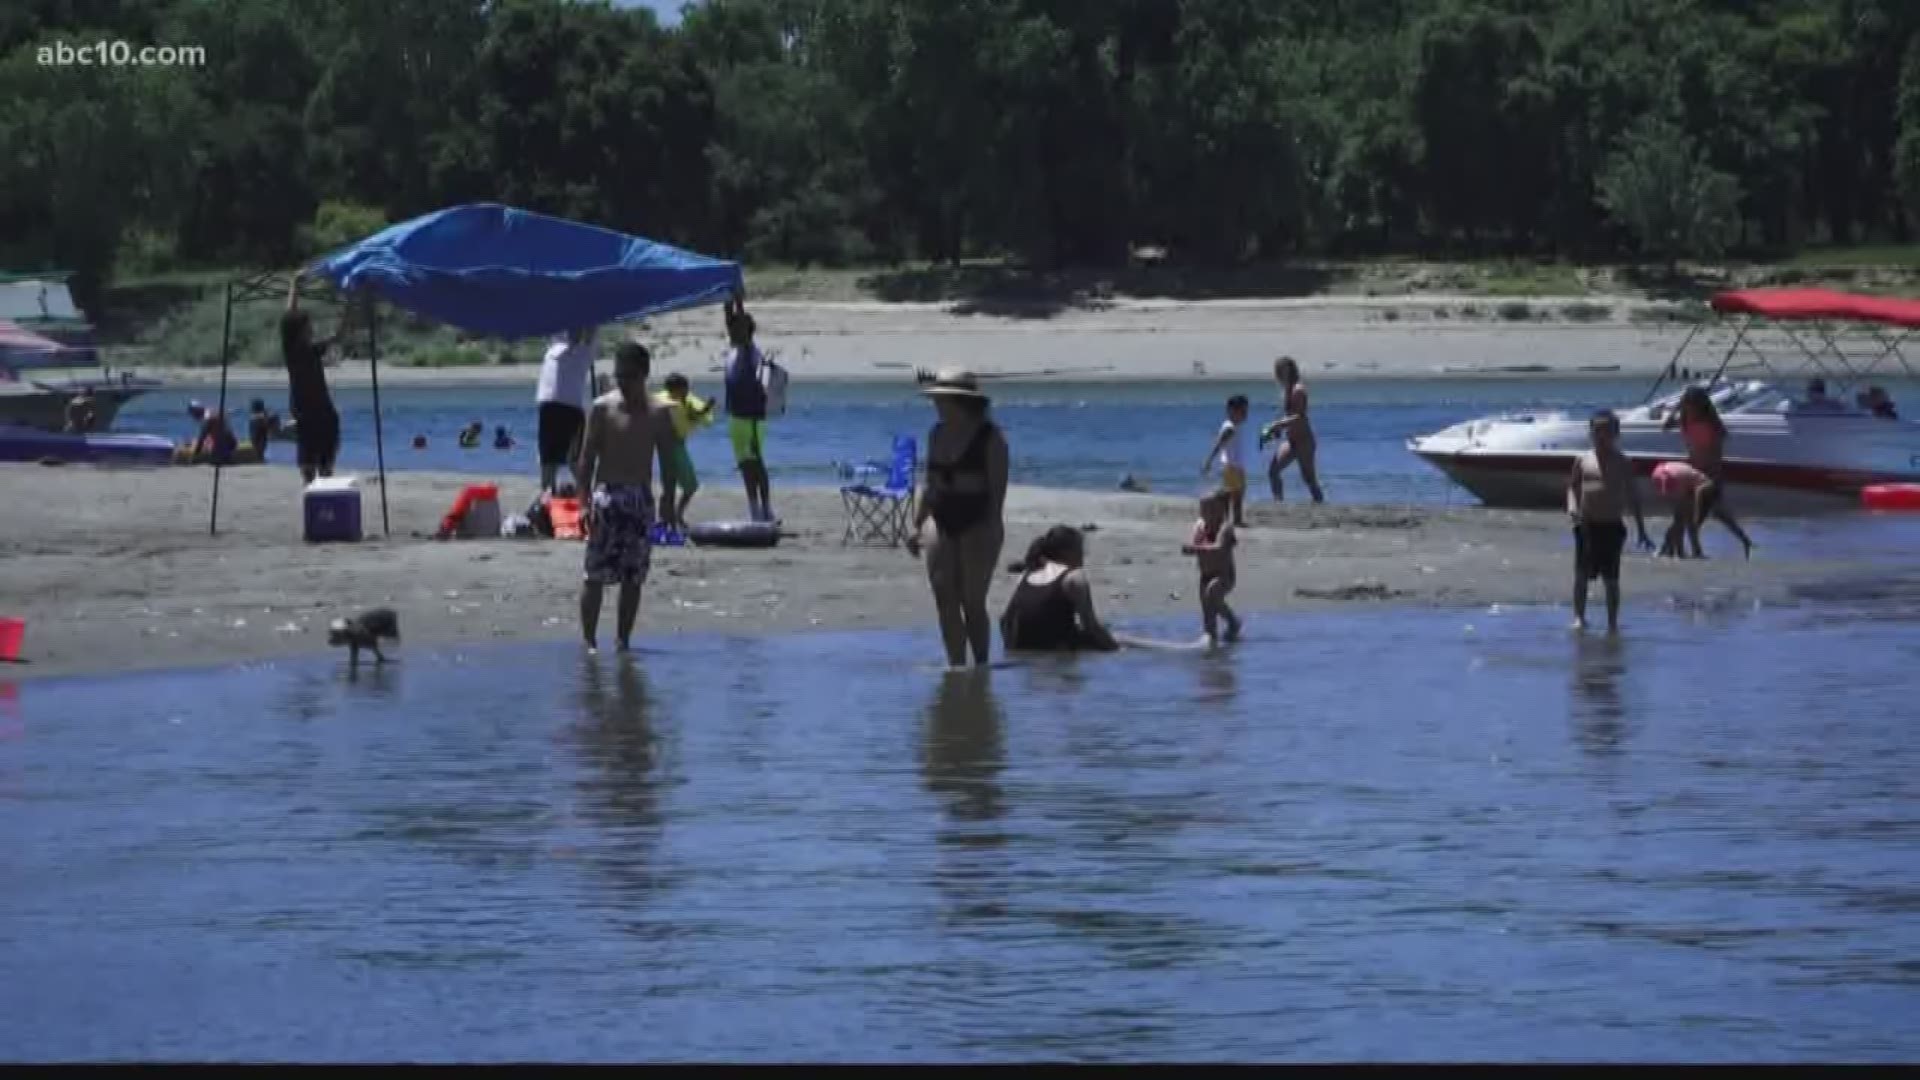 Safety was on the minds of many parents, who were taking  extra precaution, after hearing an 8-year-old boy drowned at the Sacramento River Friday. (June 23, 2018)